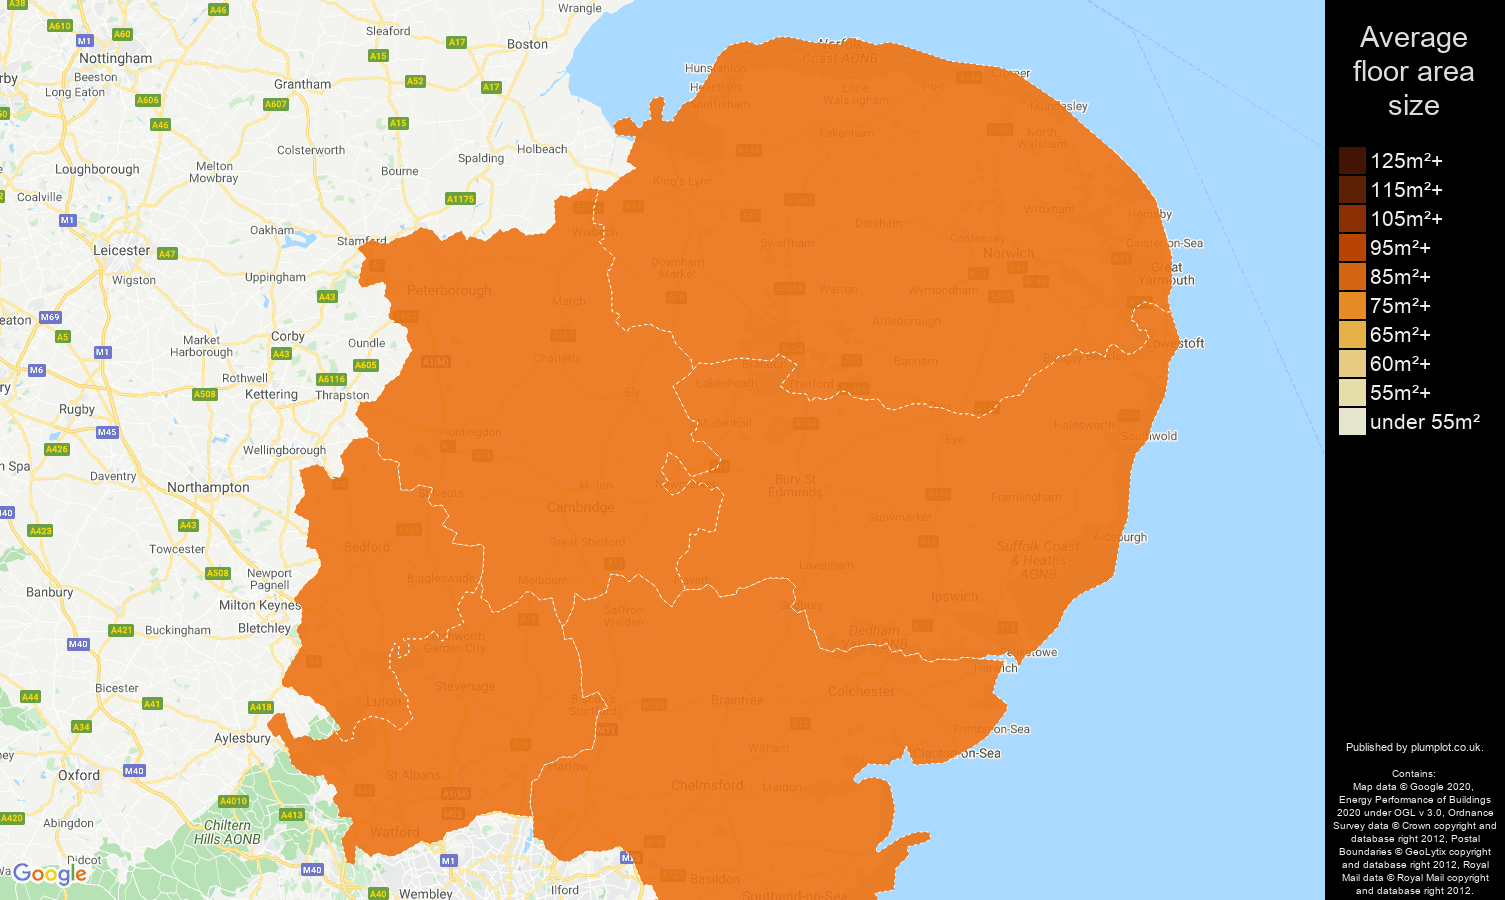 East of England map of average floor area size of properties